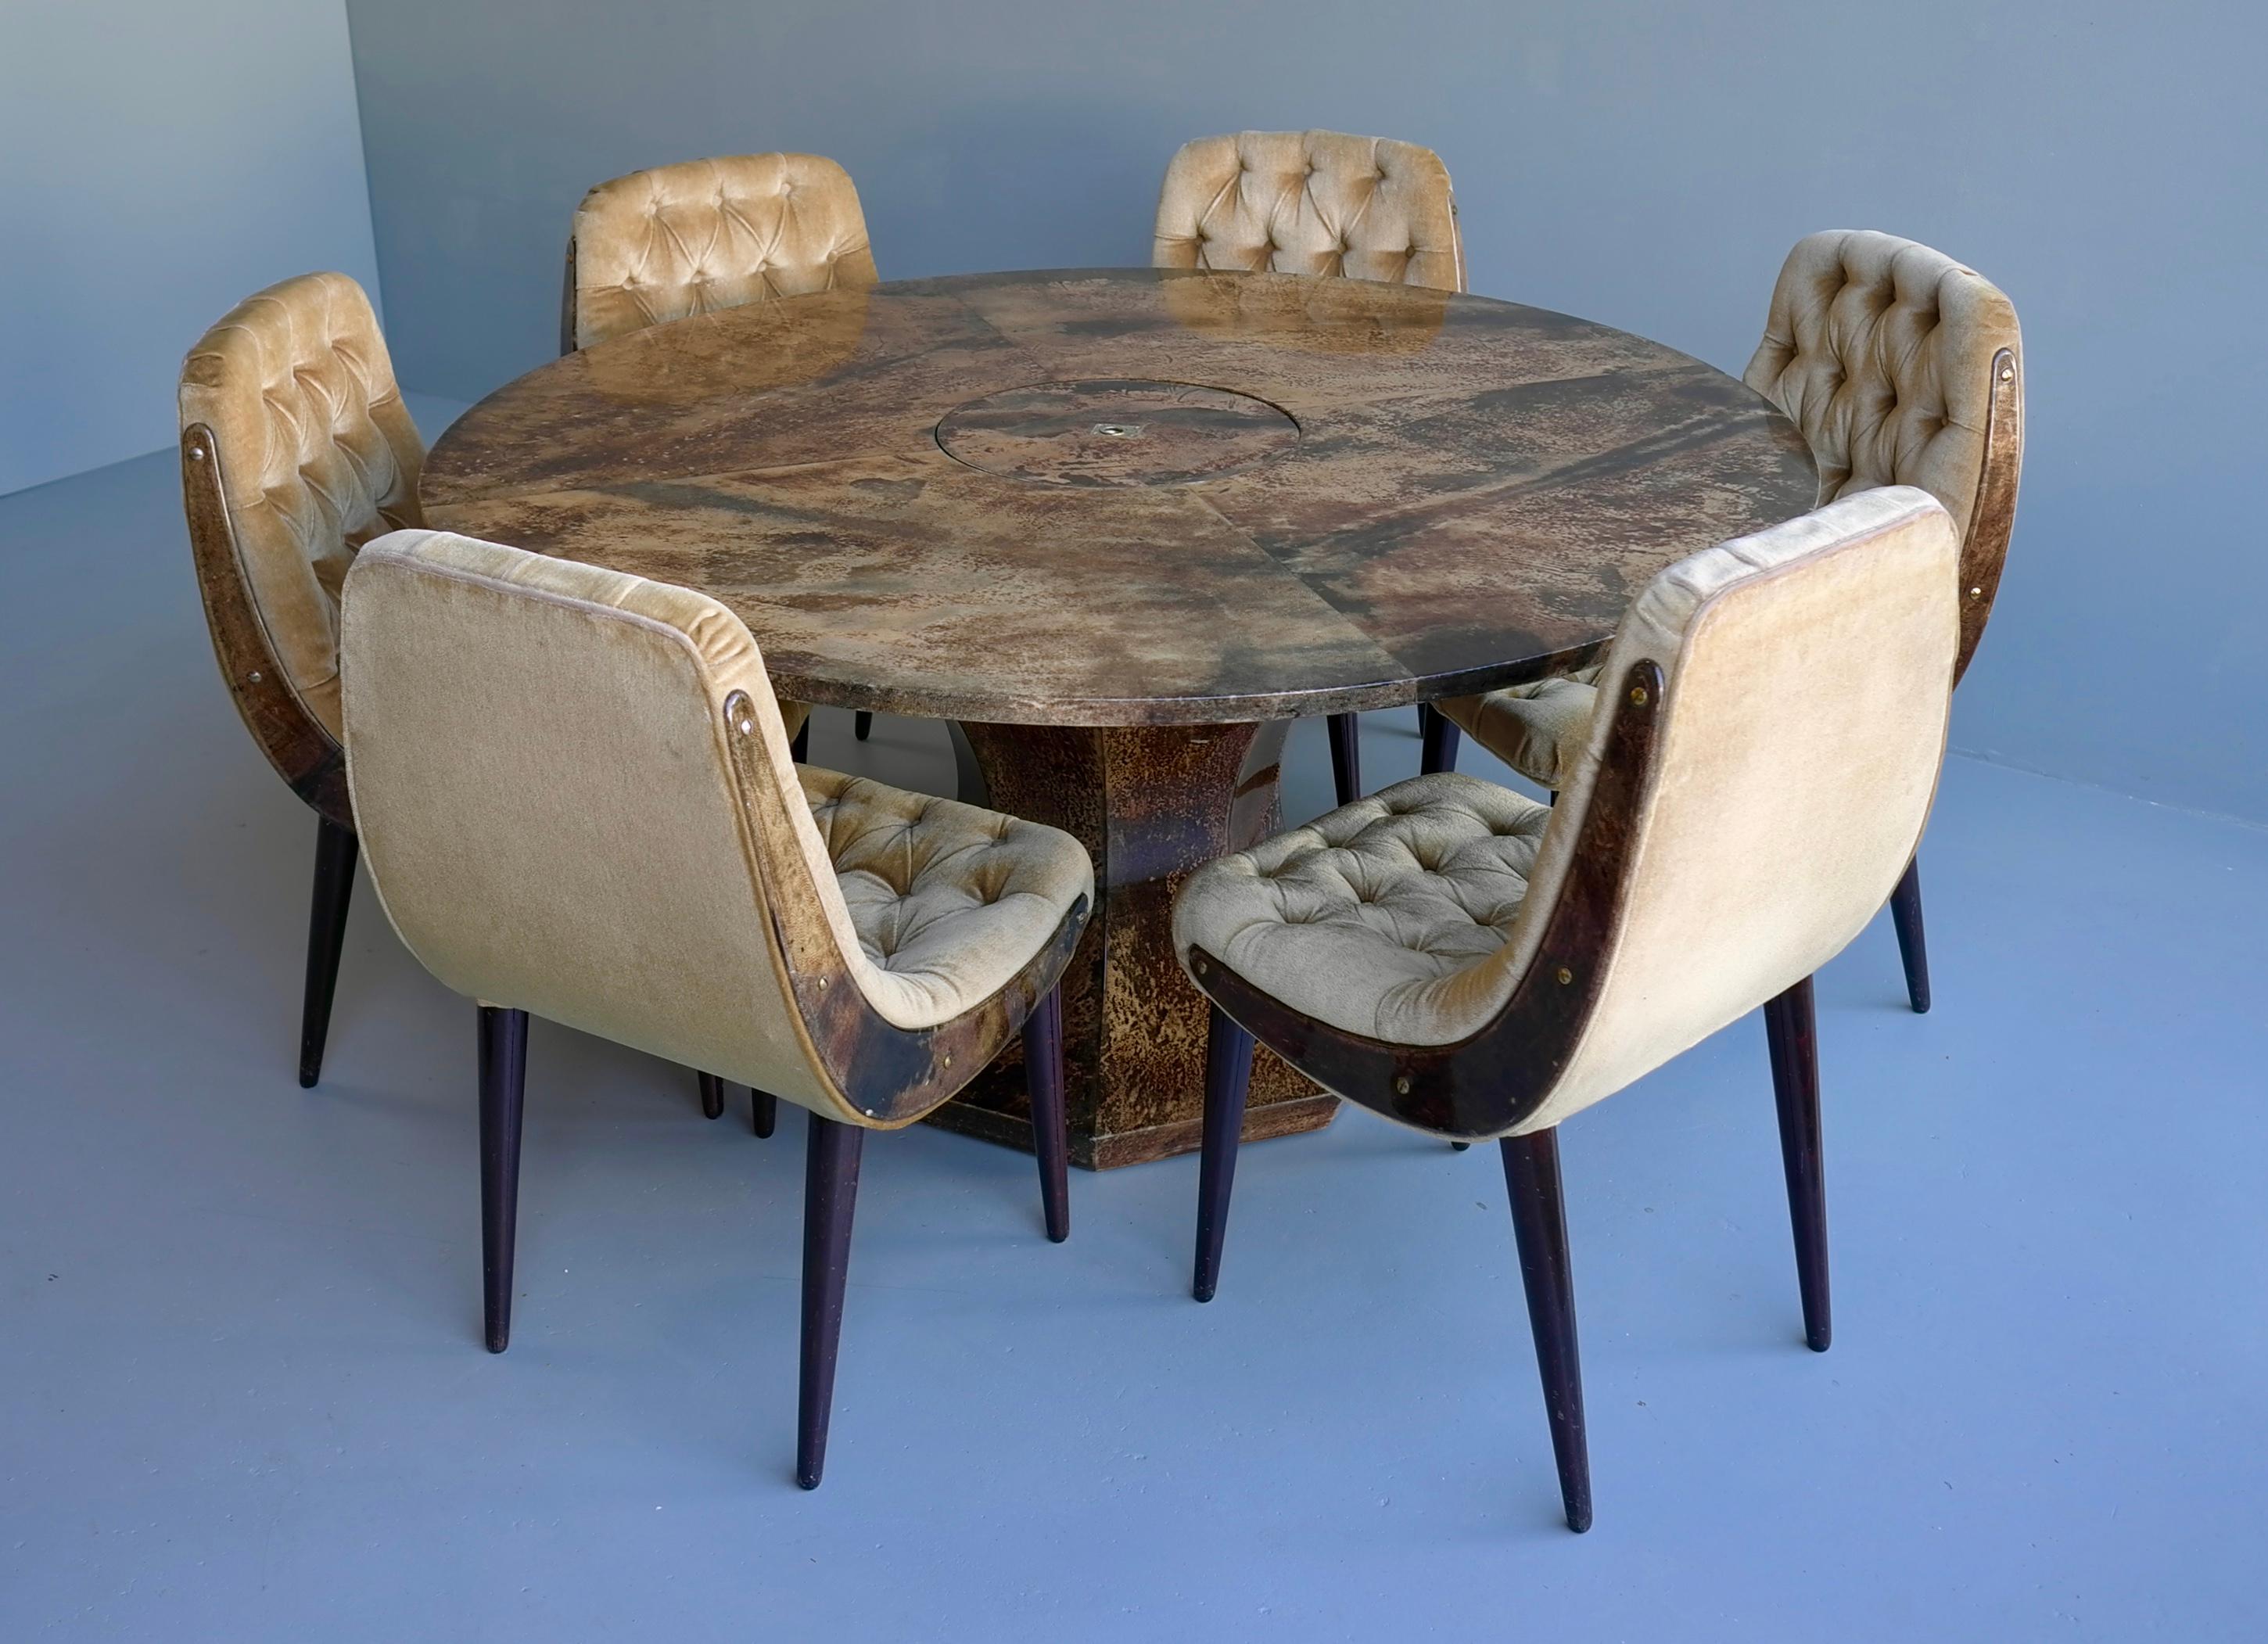 Mid-20th Century Aldo Tura Dining Set, Goatskin Parchment Table with 6 Velvet Chairs, Italy 1950s For Sale